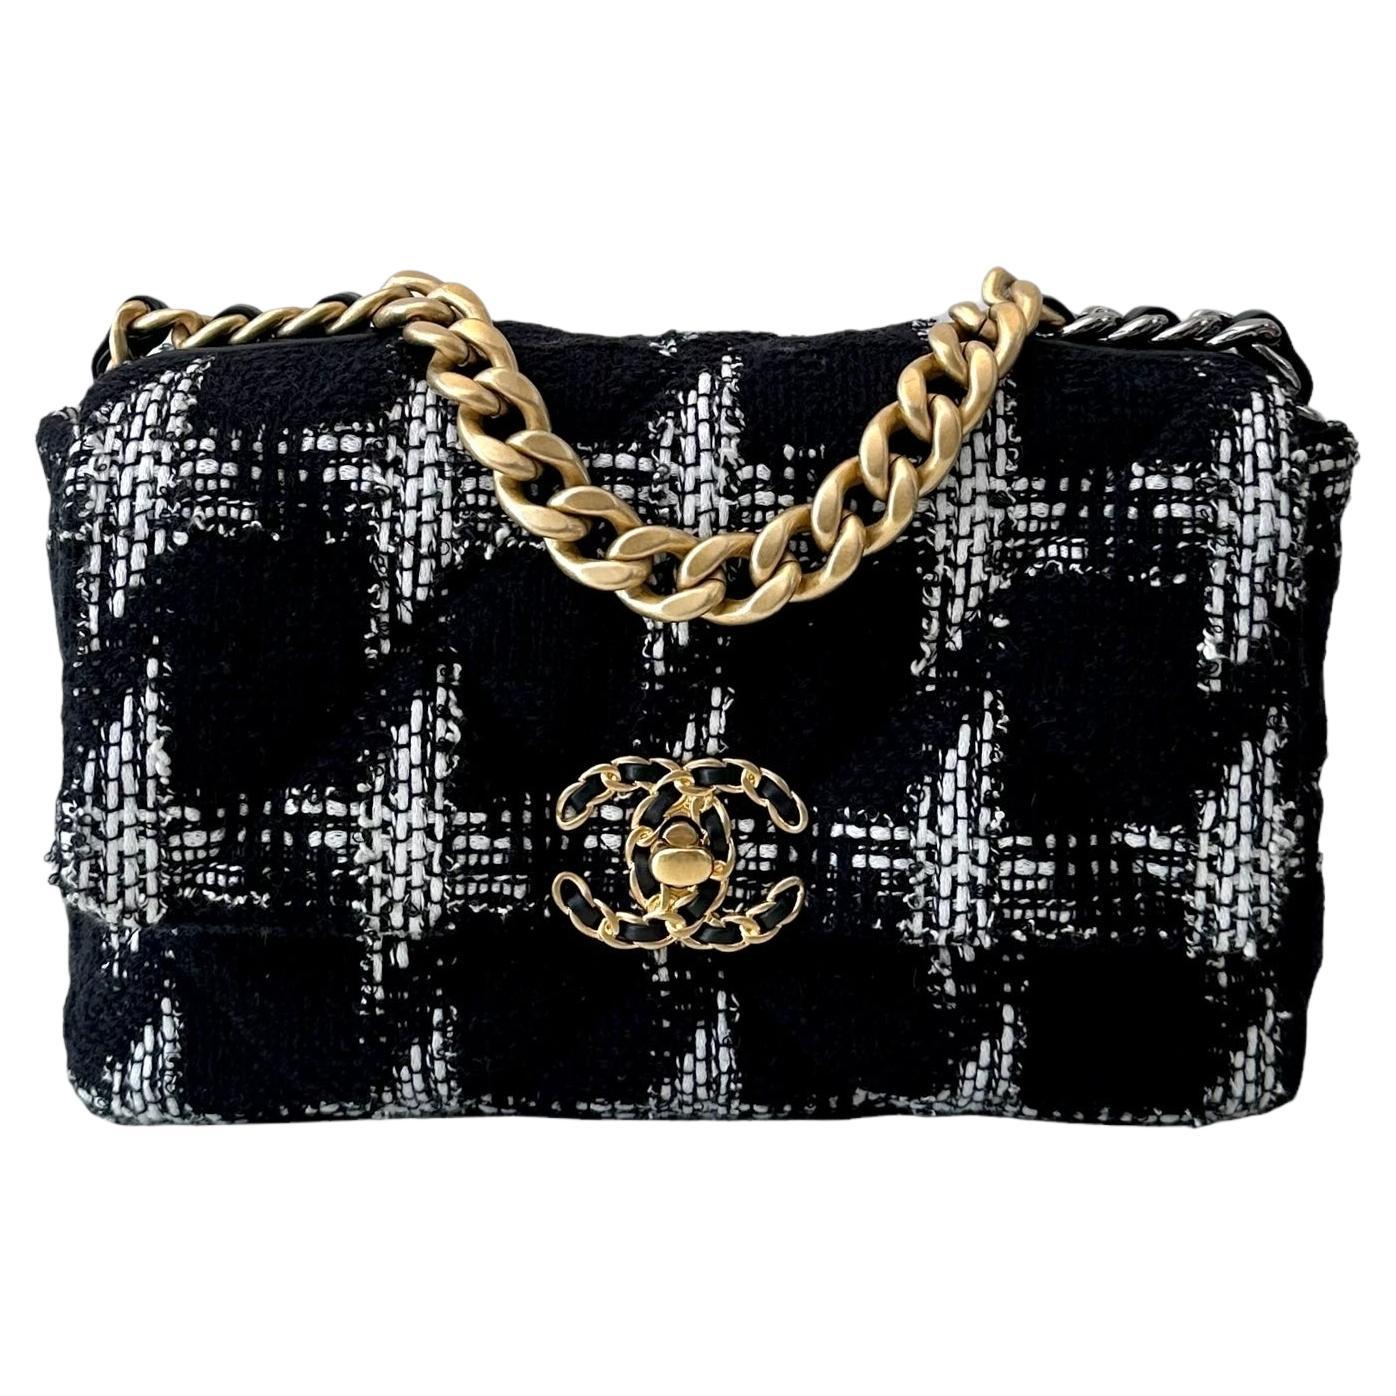 Chanel Black and White Tweed Chanel 19 Flap Bag For Sale